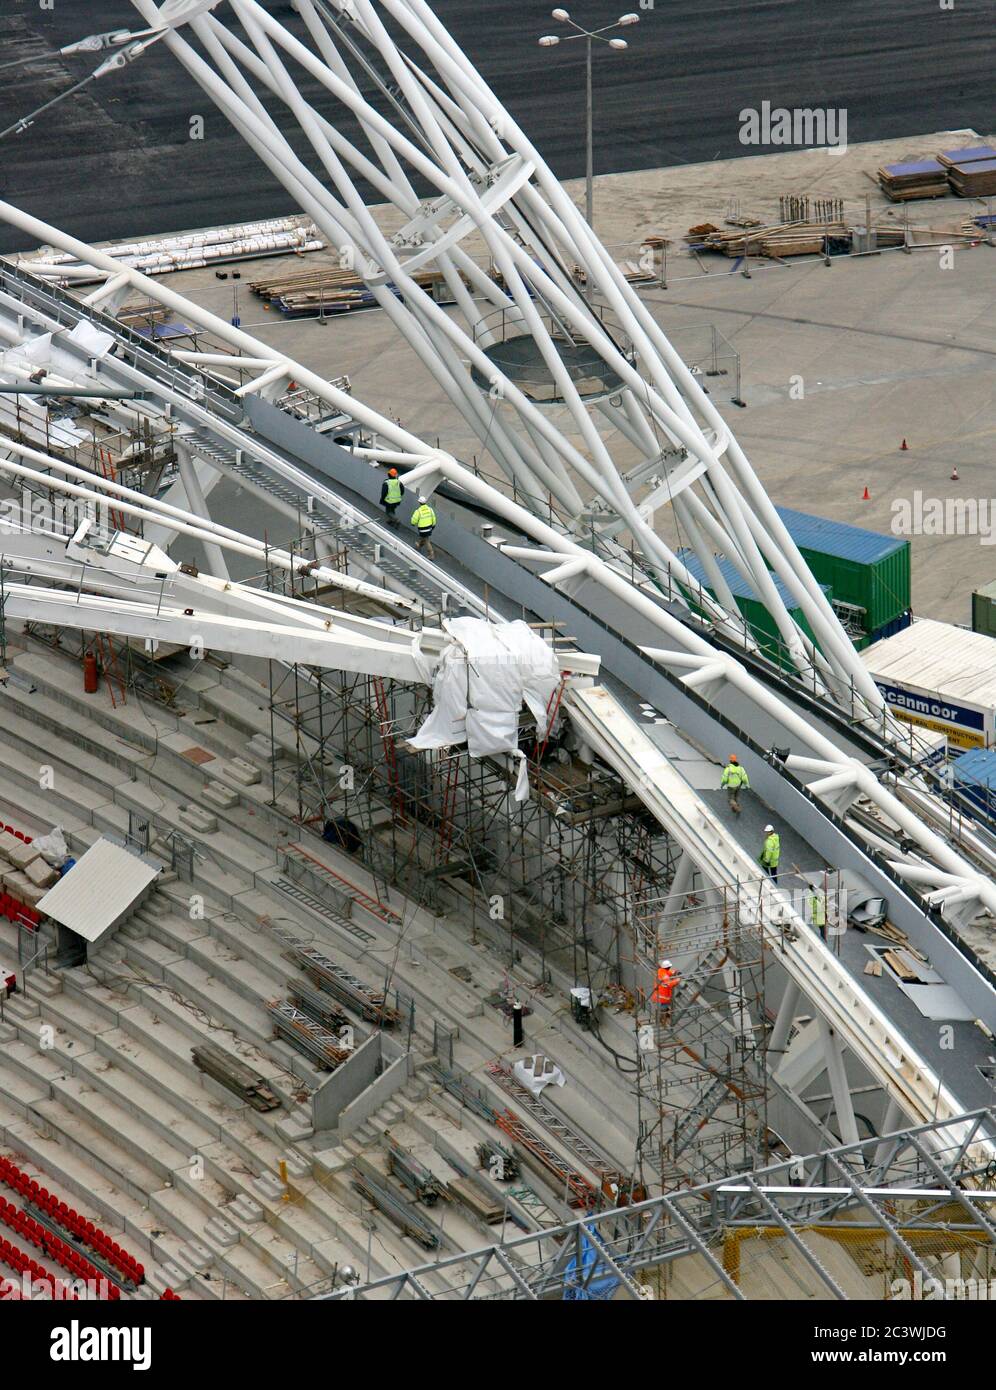 Rebuilding Wembley Stadium. A girder falls from the roof structure and all the construction workers evacuated to safety 20th March 2006. After the old Stock Photo